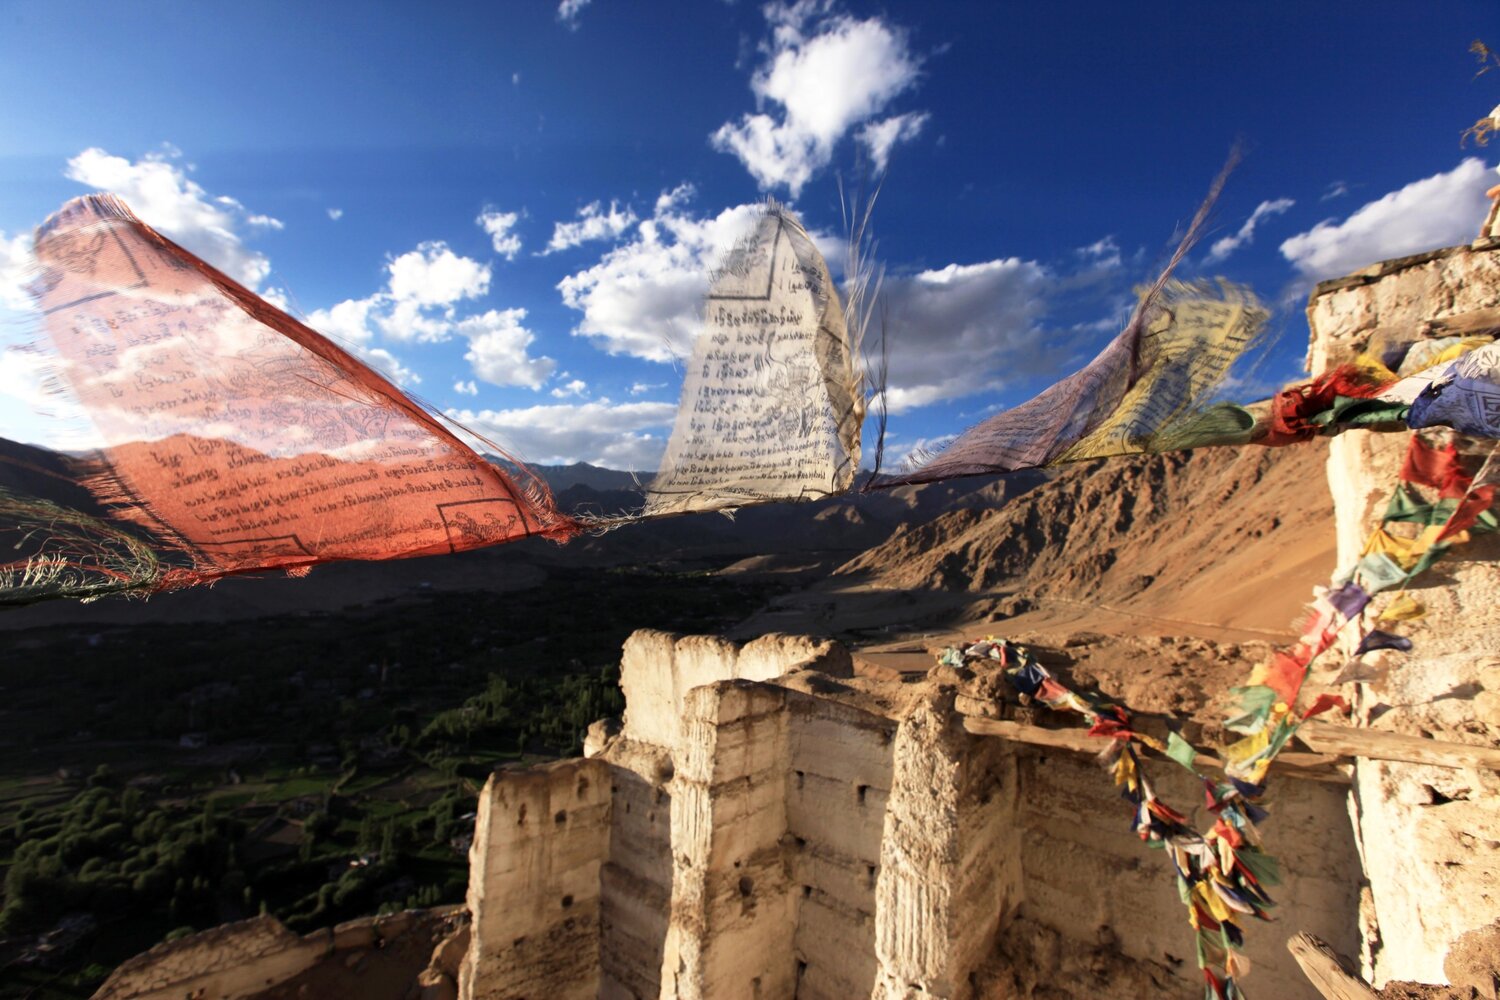 Prayer flags fly from the semi-ruined gompa (monastery) above Leh Palace, Indus Valley, Ladakh.